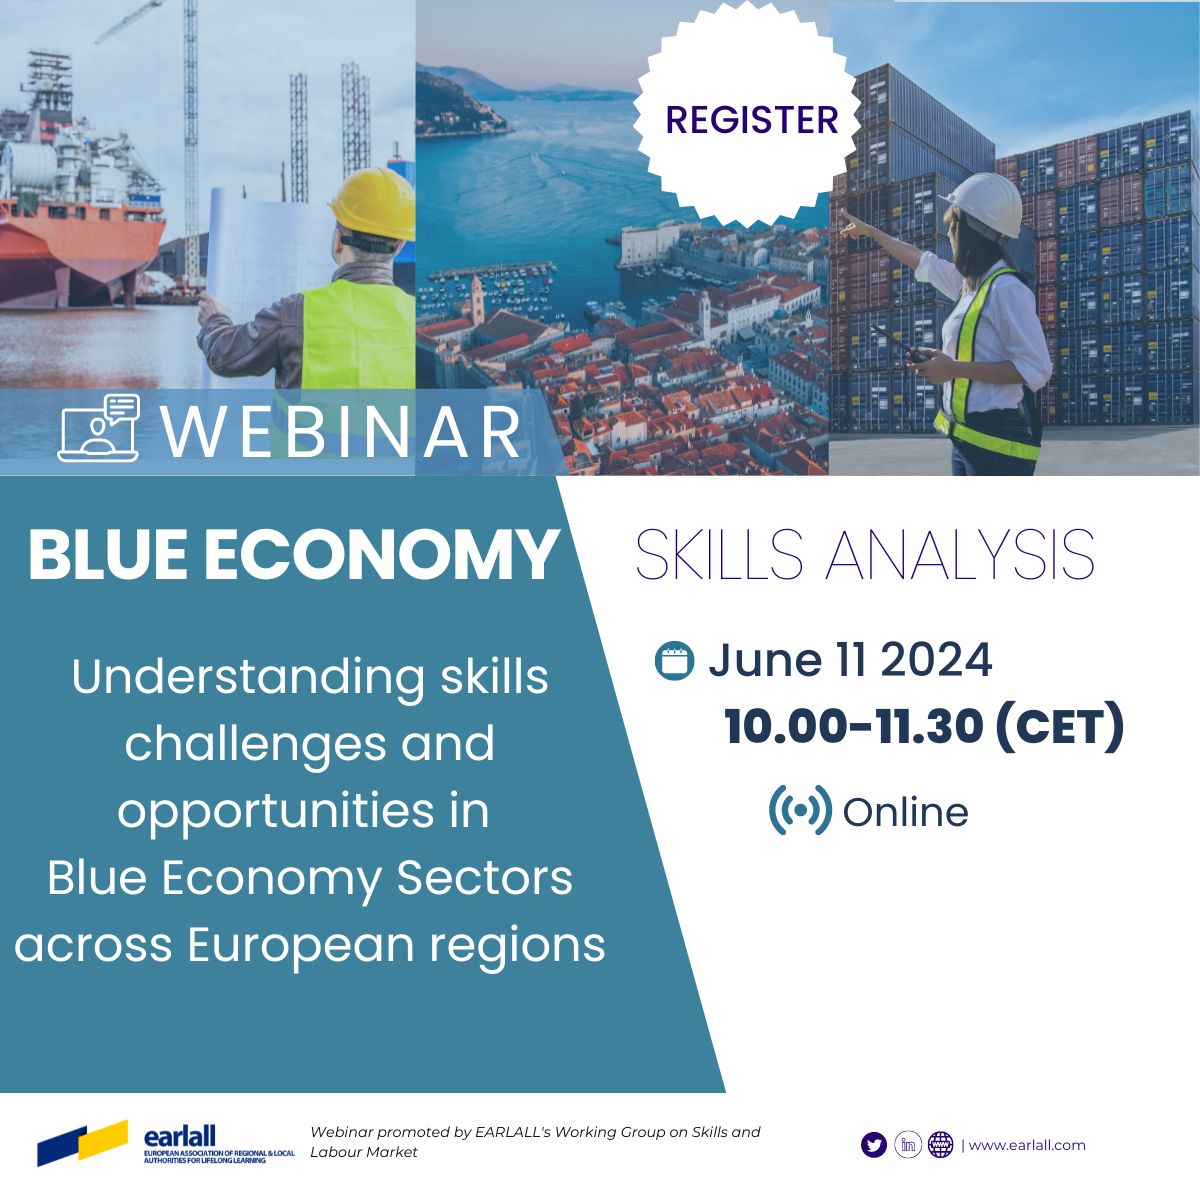 🌊In light of the #WorldOceanDay, EARLALL brings together experts from @EU_MARE, @GO_onderwijs, @regionbretagne, @GobAsturias and Vestland County to explore the skills challenges and opportunities within the #BlueEconomy sectors!

🗓️11 June
✍️Register: forms.gle/iBf8f8G8Enx6im…